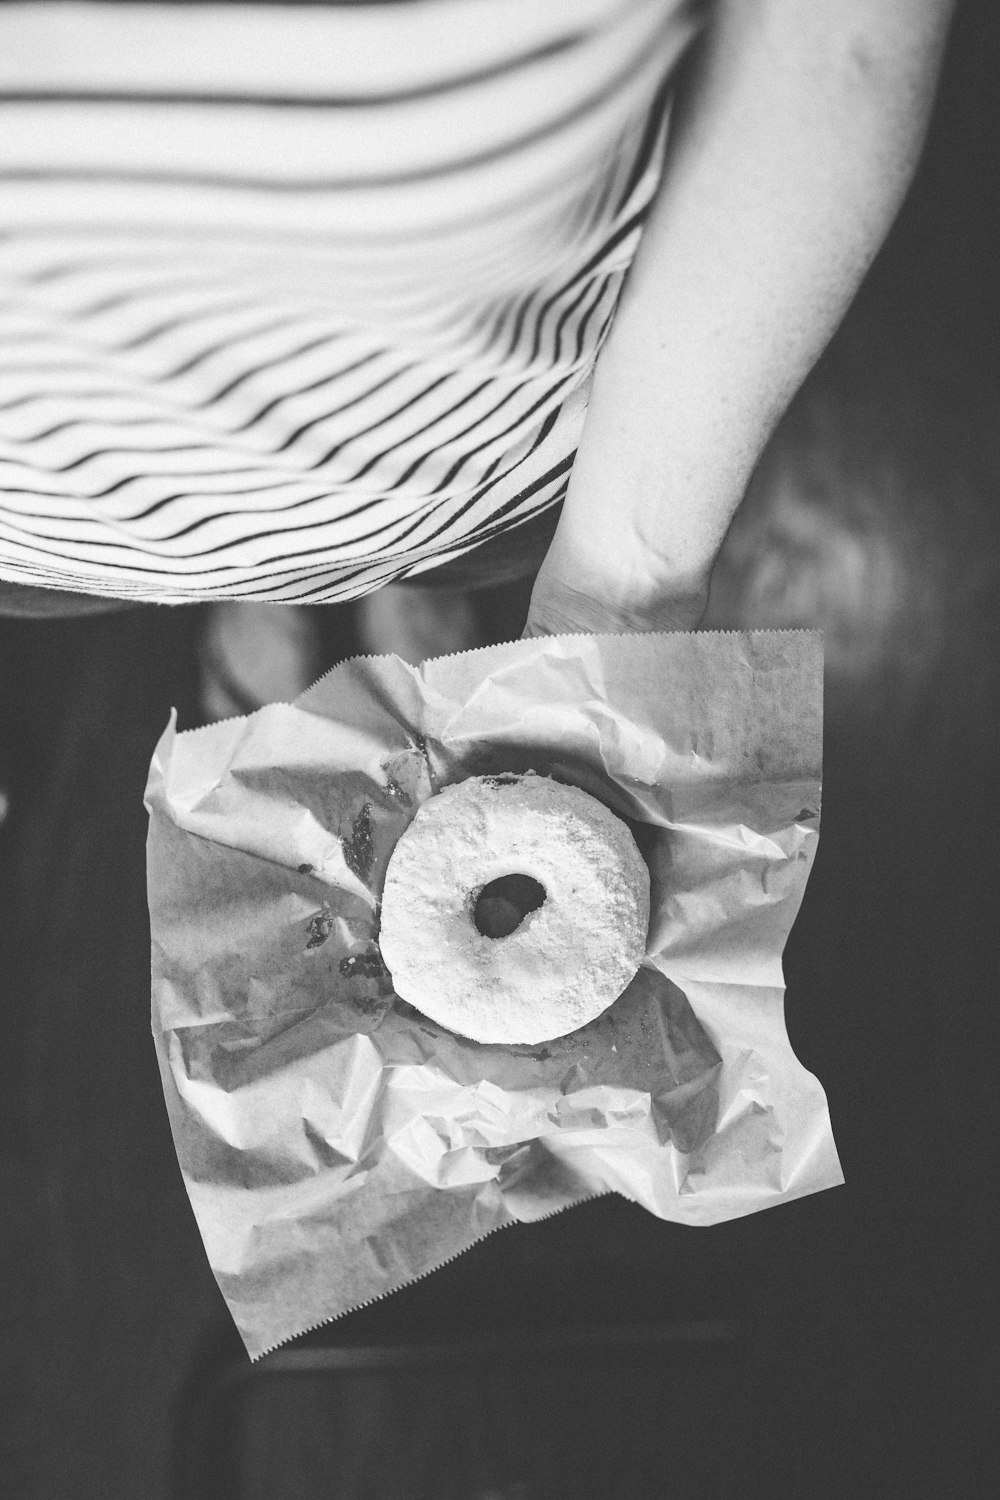 gray-scale photography of doughnut on palm